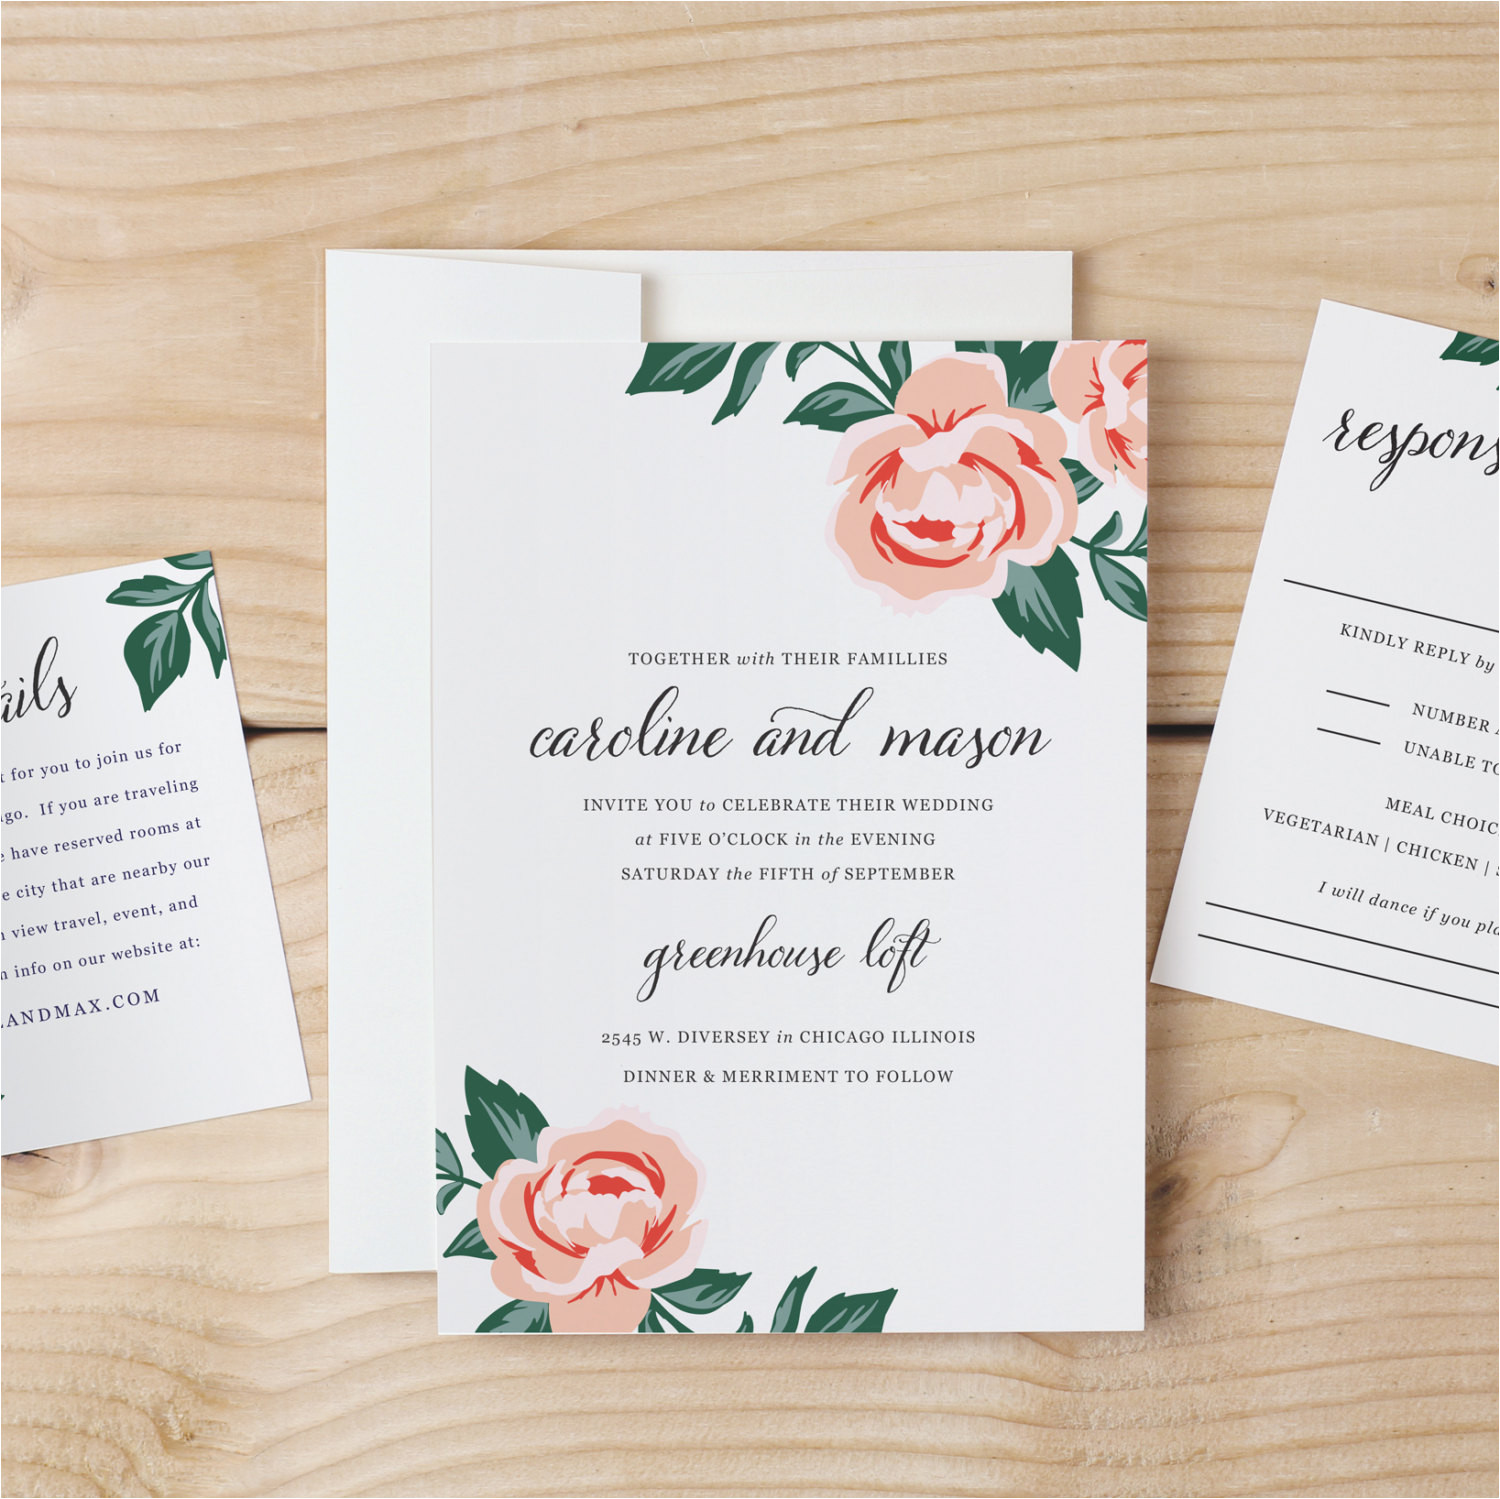 Wedding Invitation Template Pages Diy Wedding Invitation Template Colorful Floral Word or